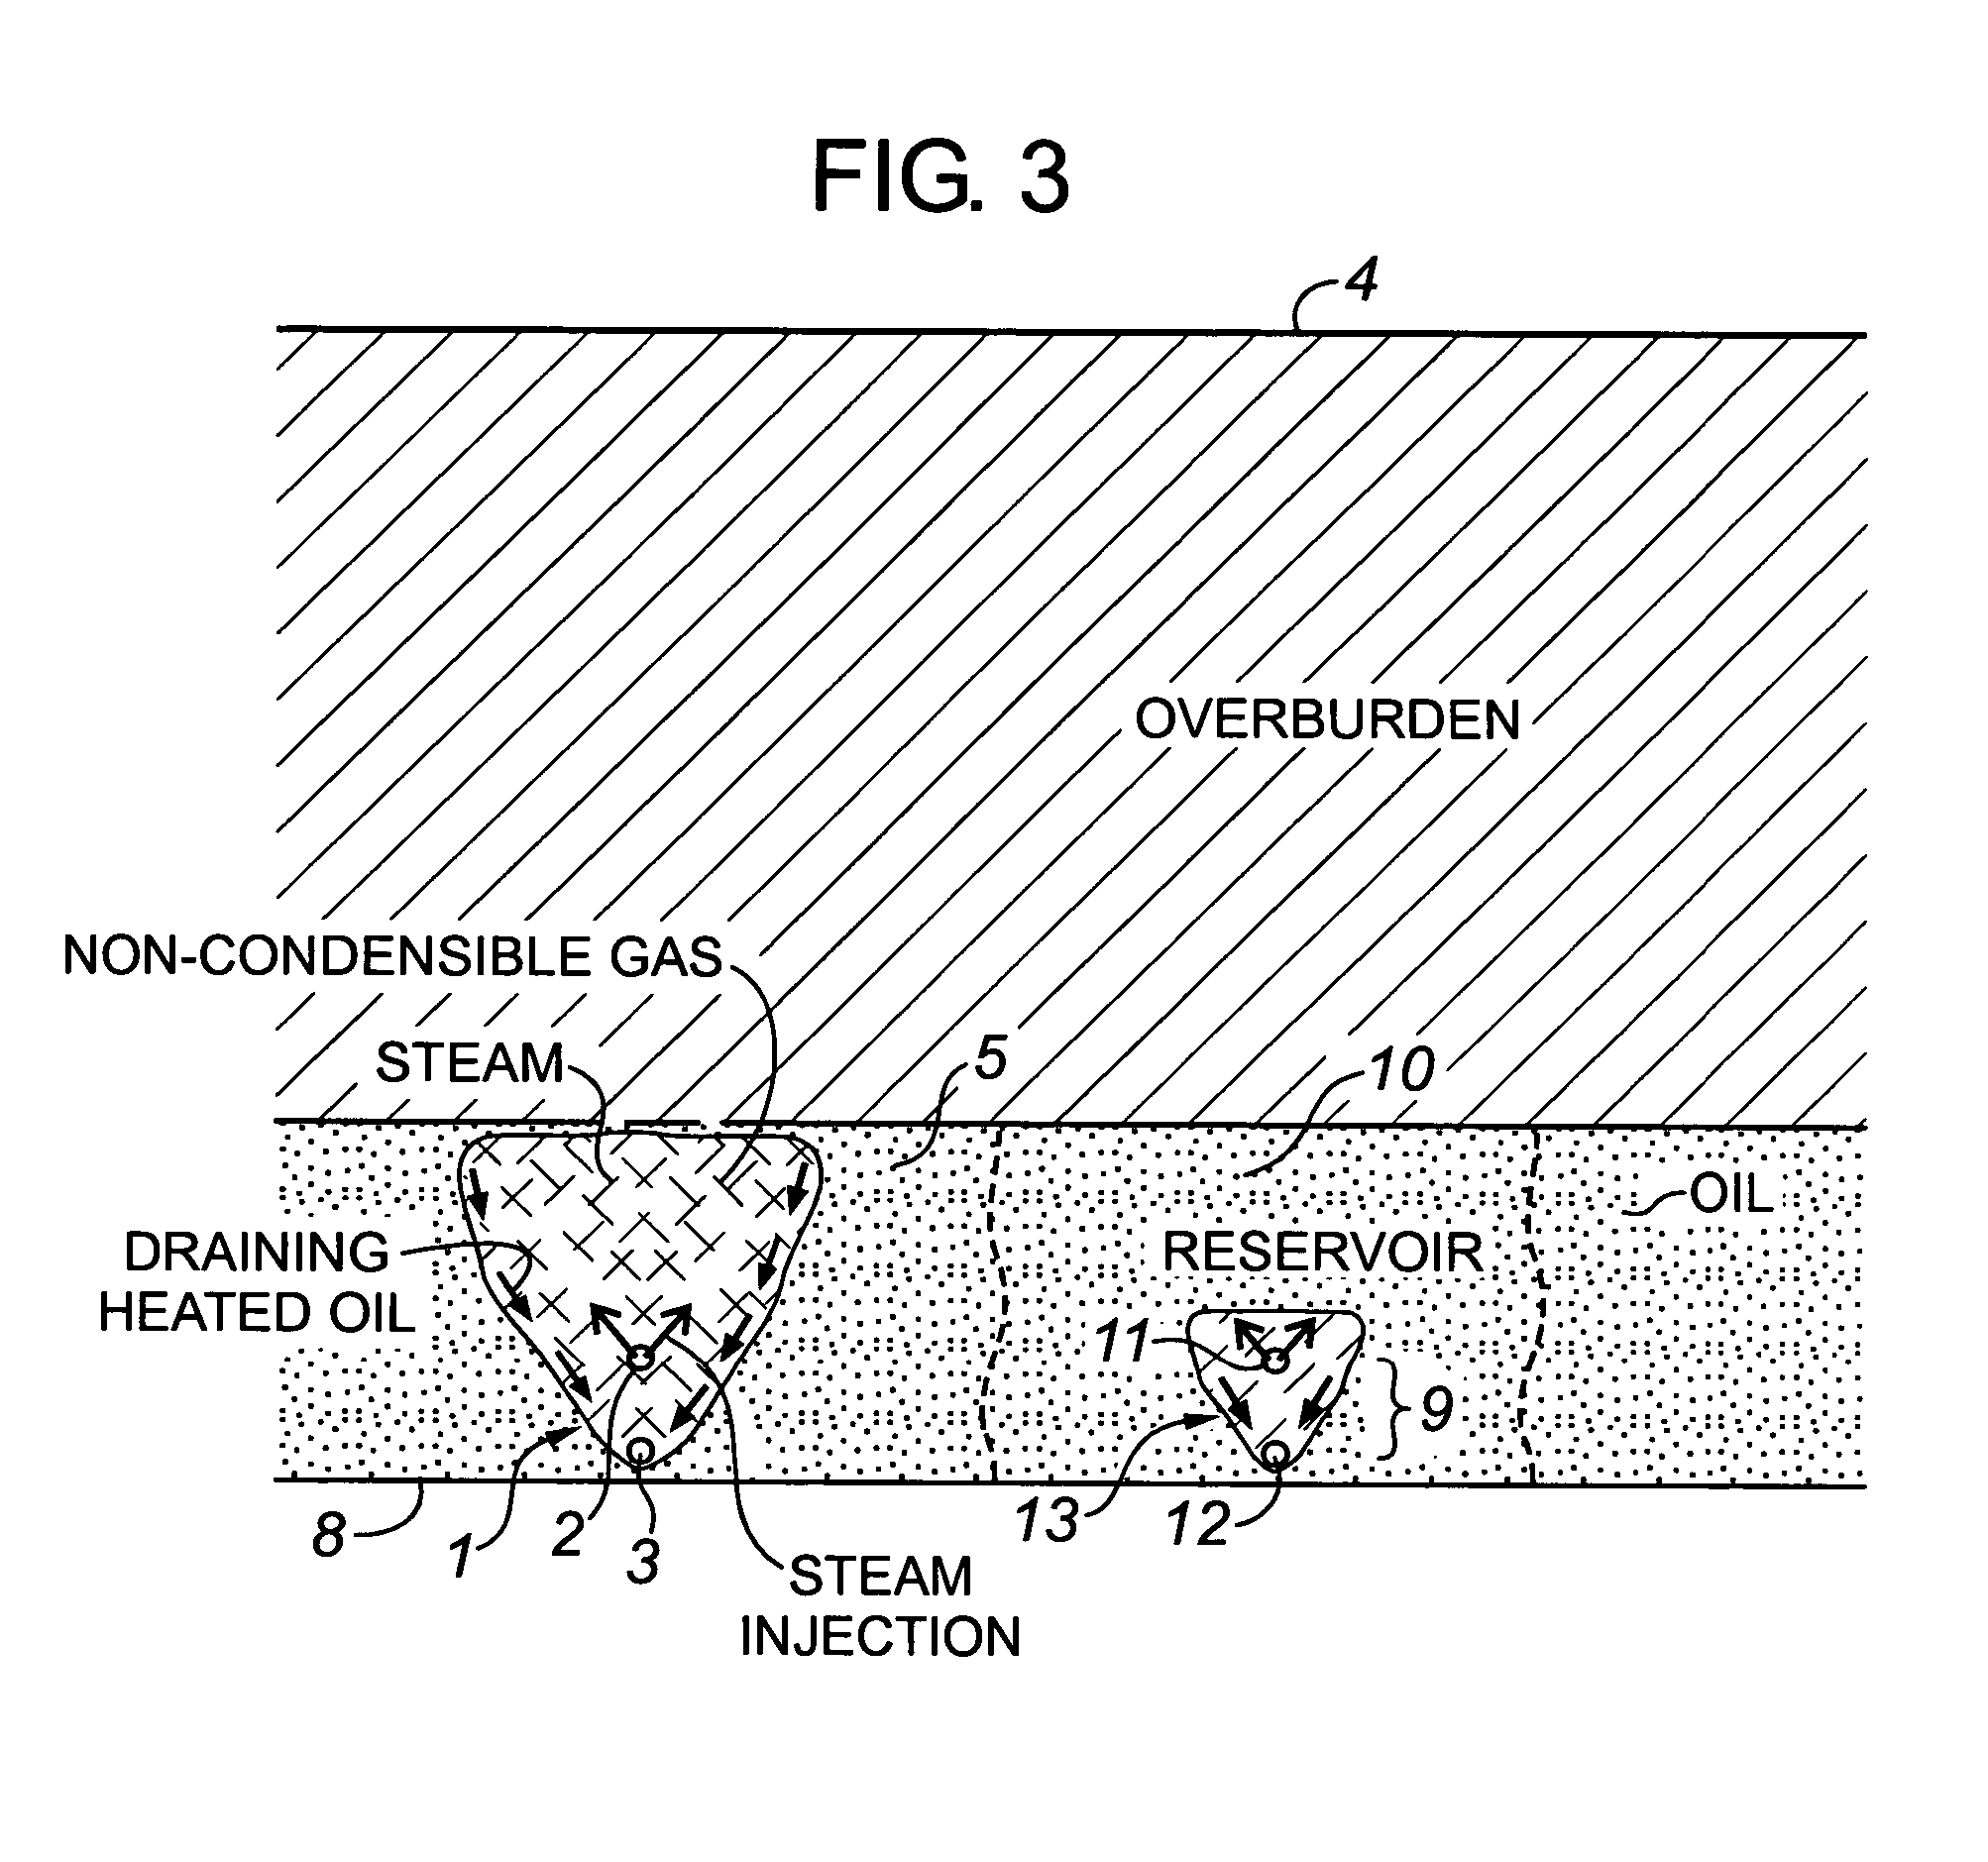 Process for sequentially applying SAGD to adjacent sections of a petroleum reservoir